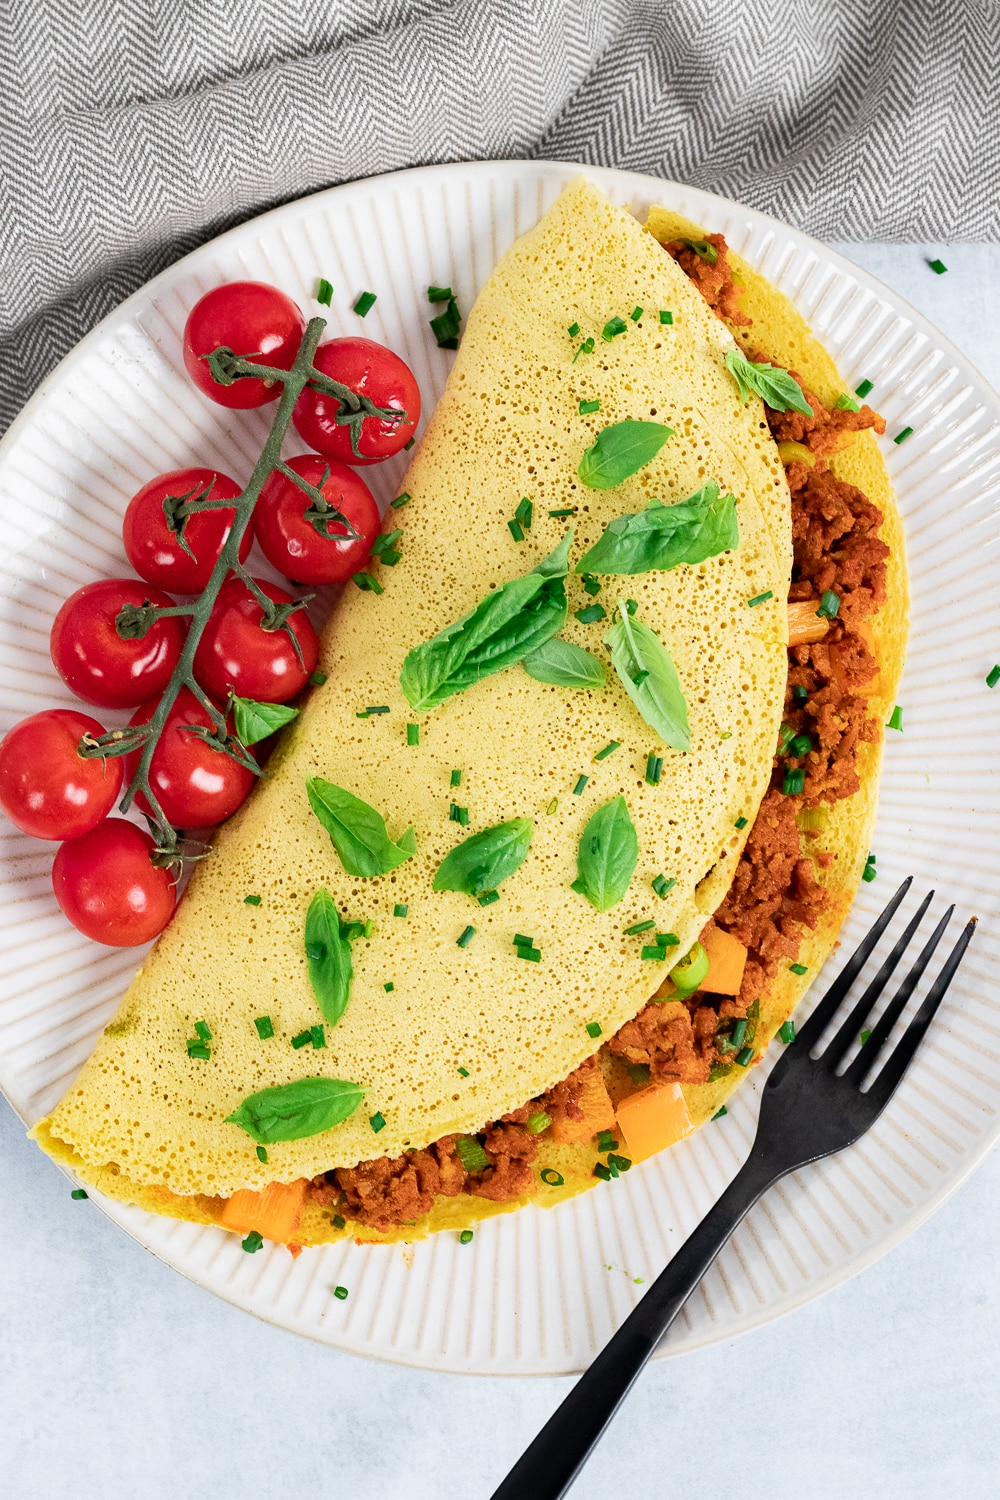 Yellow omelette folded in half stuffed with brown crumbles sprinkled with freshly cut herbs and cherry tomatoes on a vine.